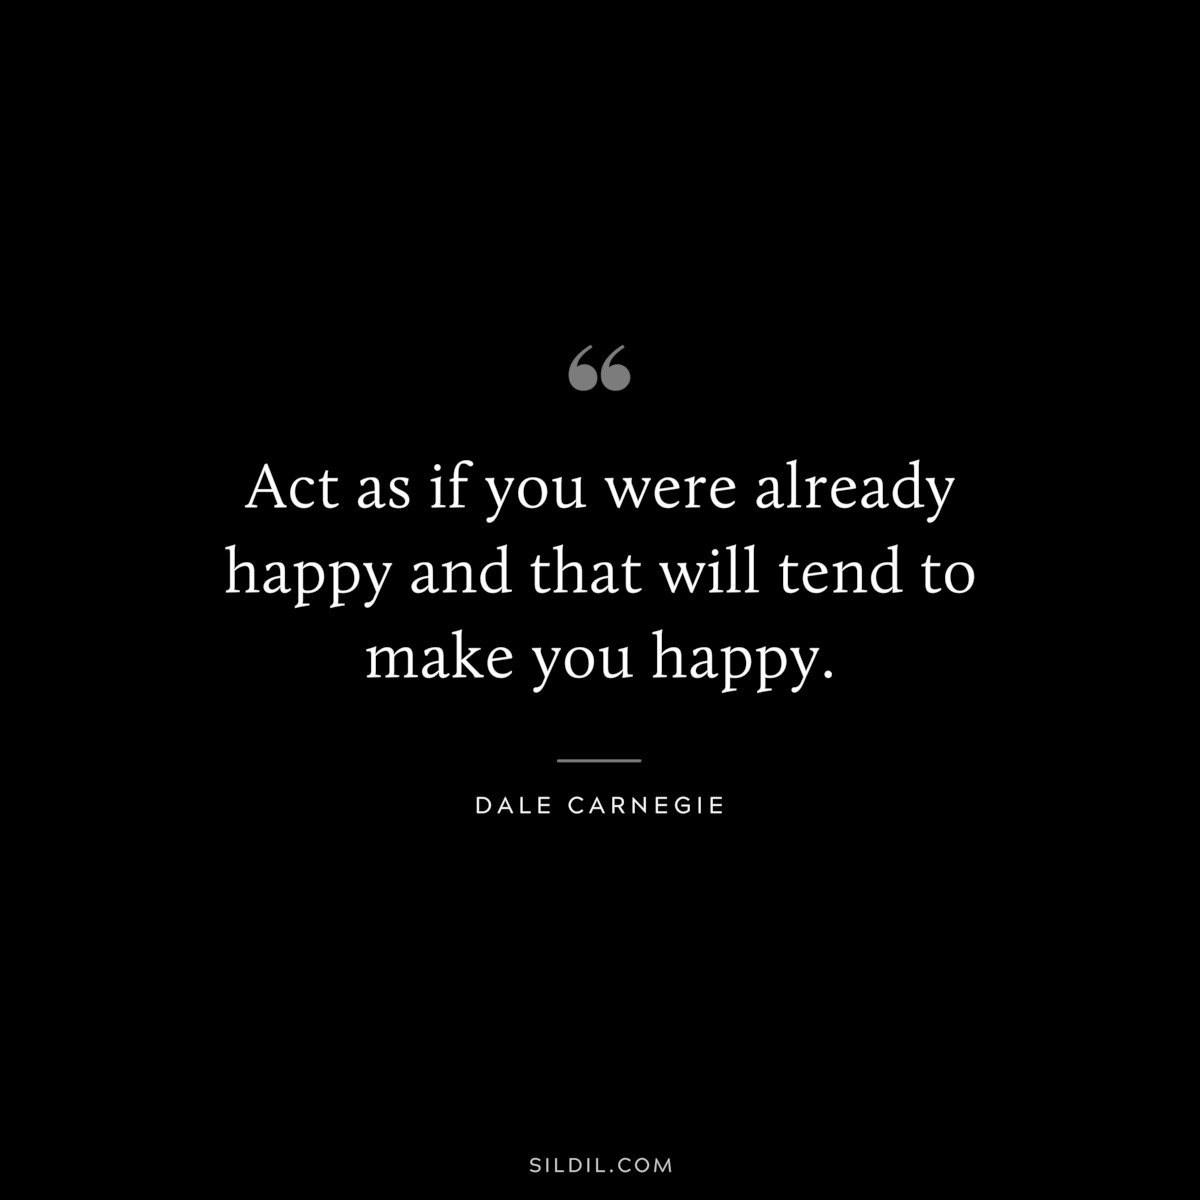 Act as if you were already happy and that will tend to make you happy.― Dale Carnegie